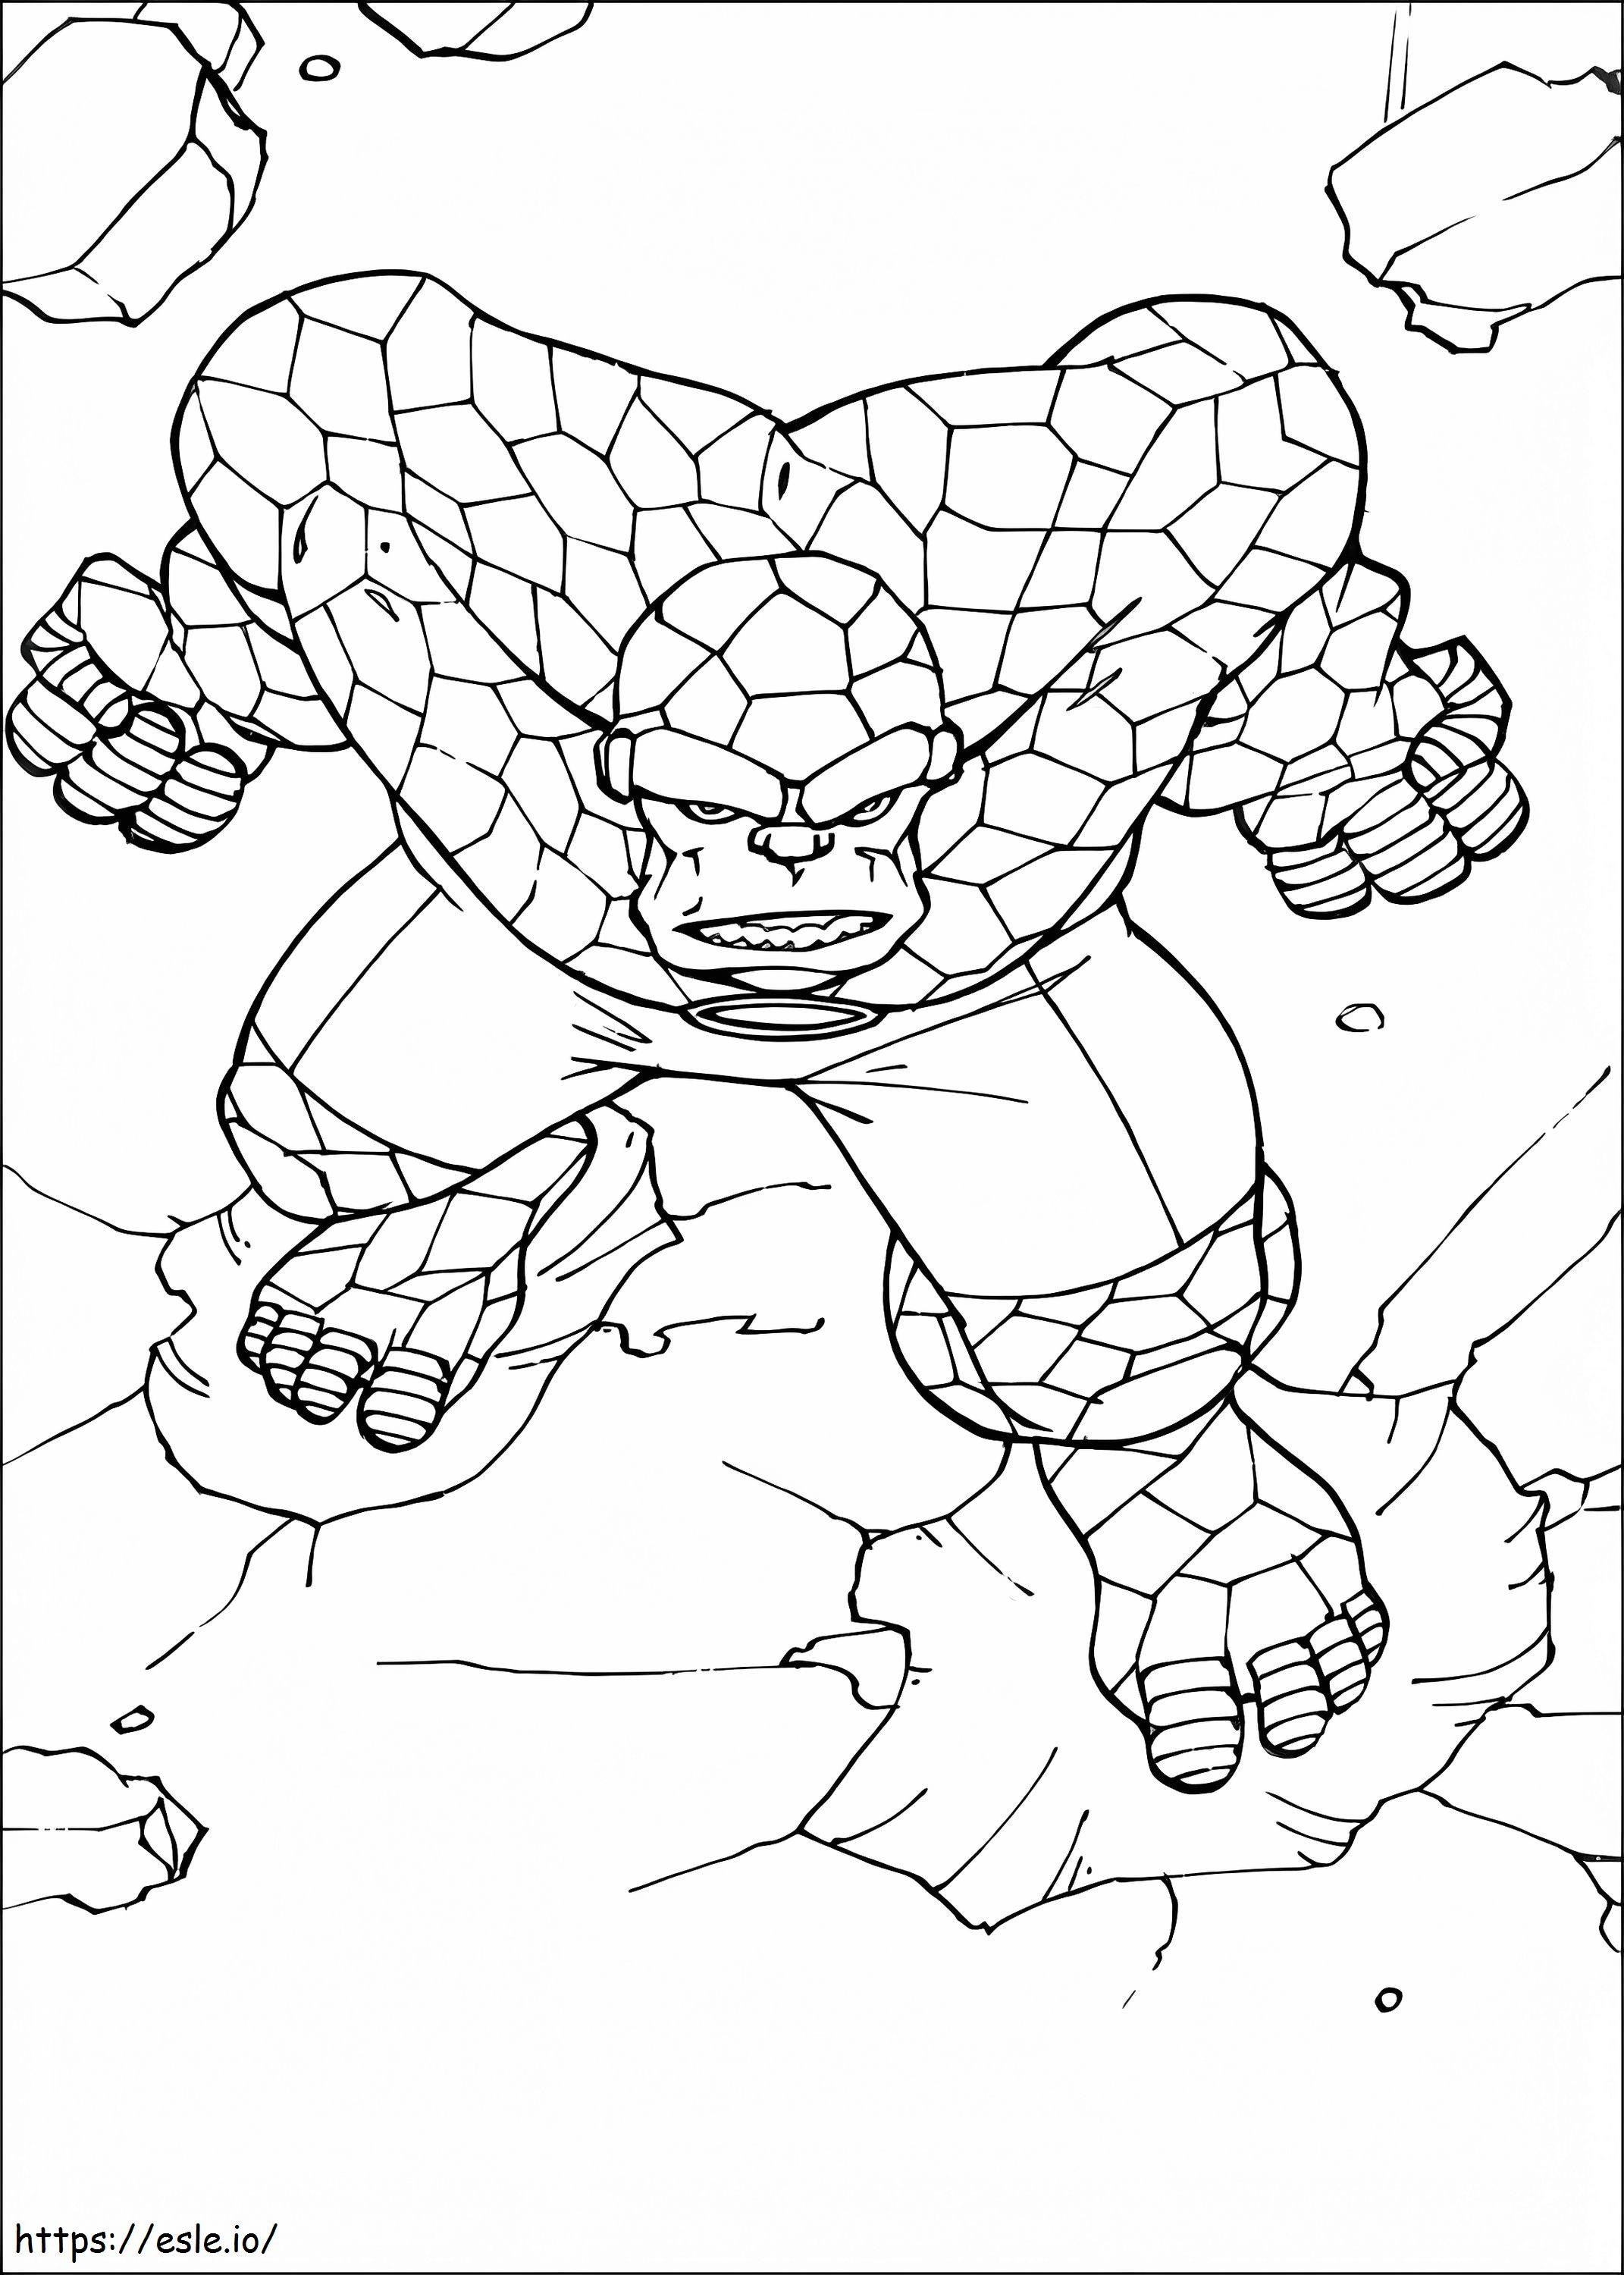 The Thing Attacks coloring page